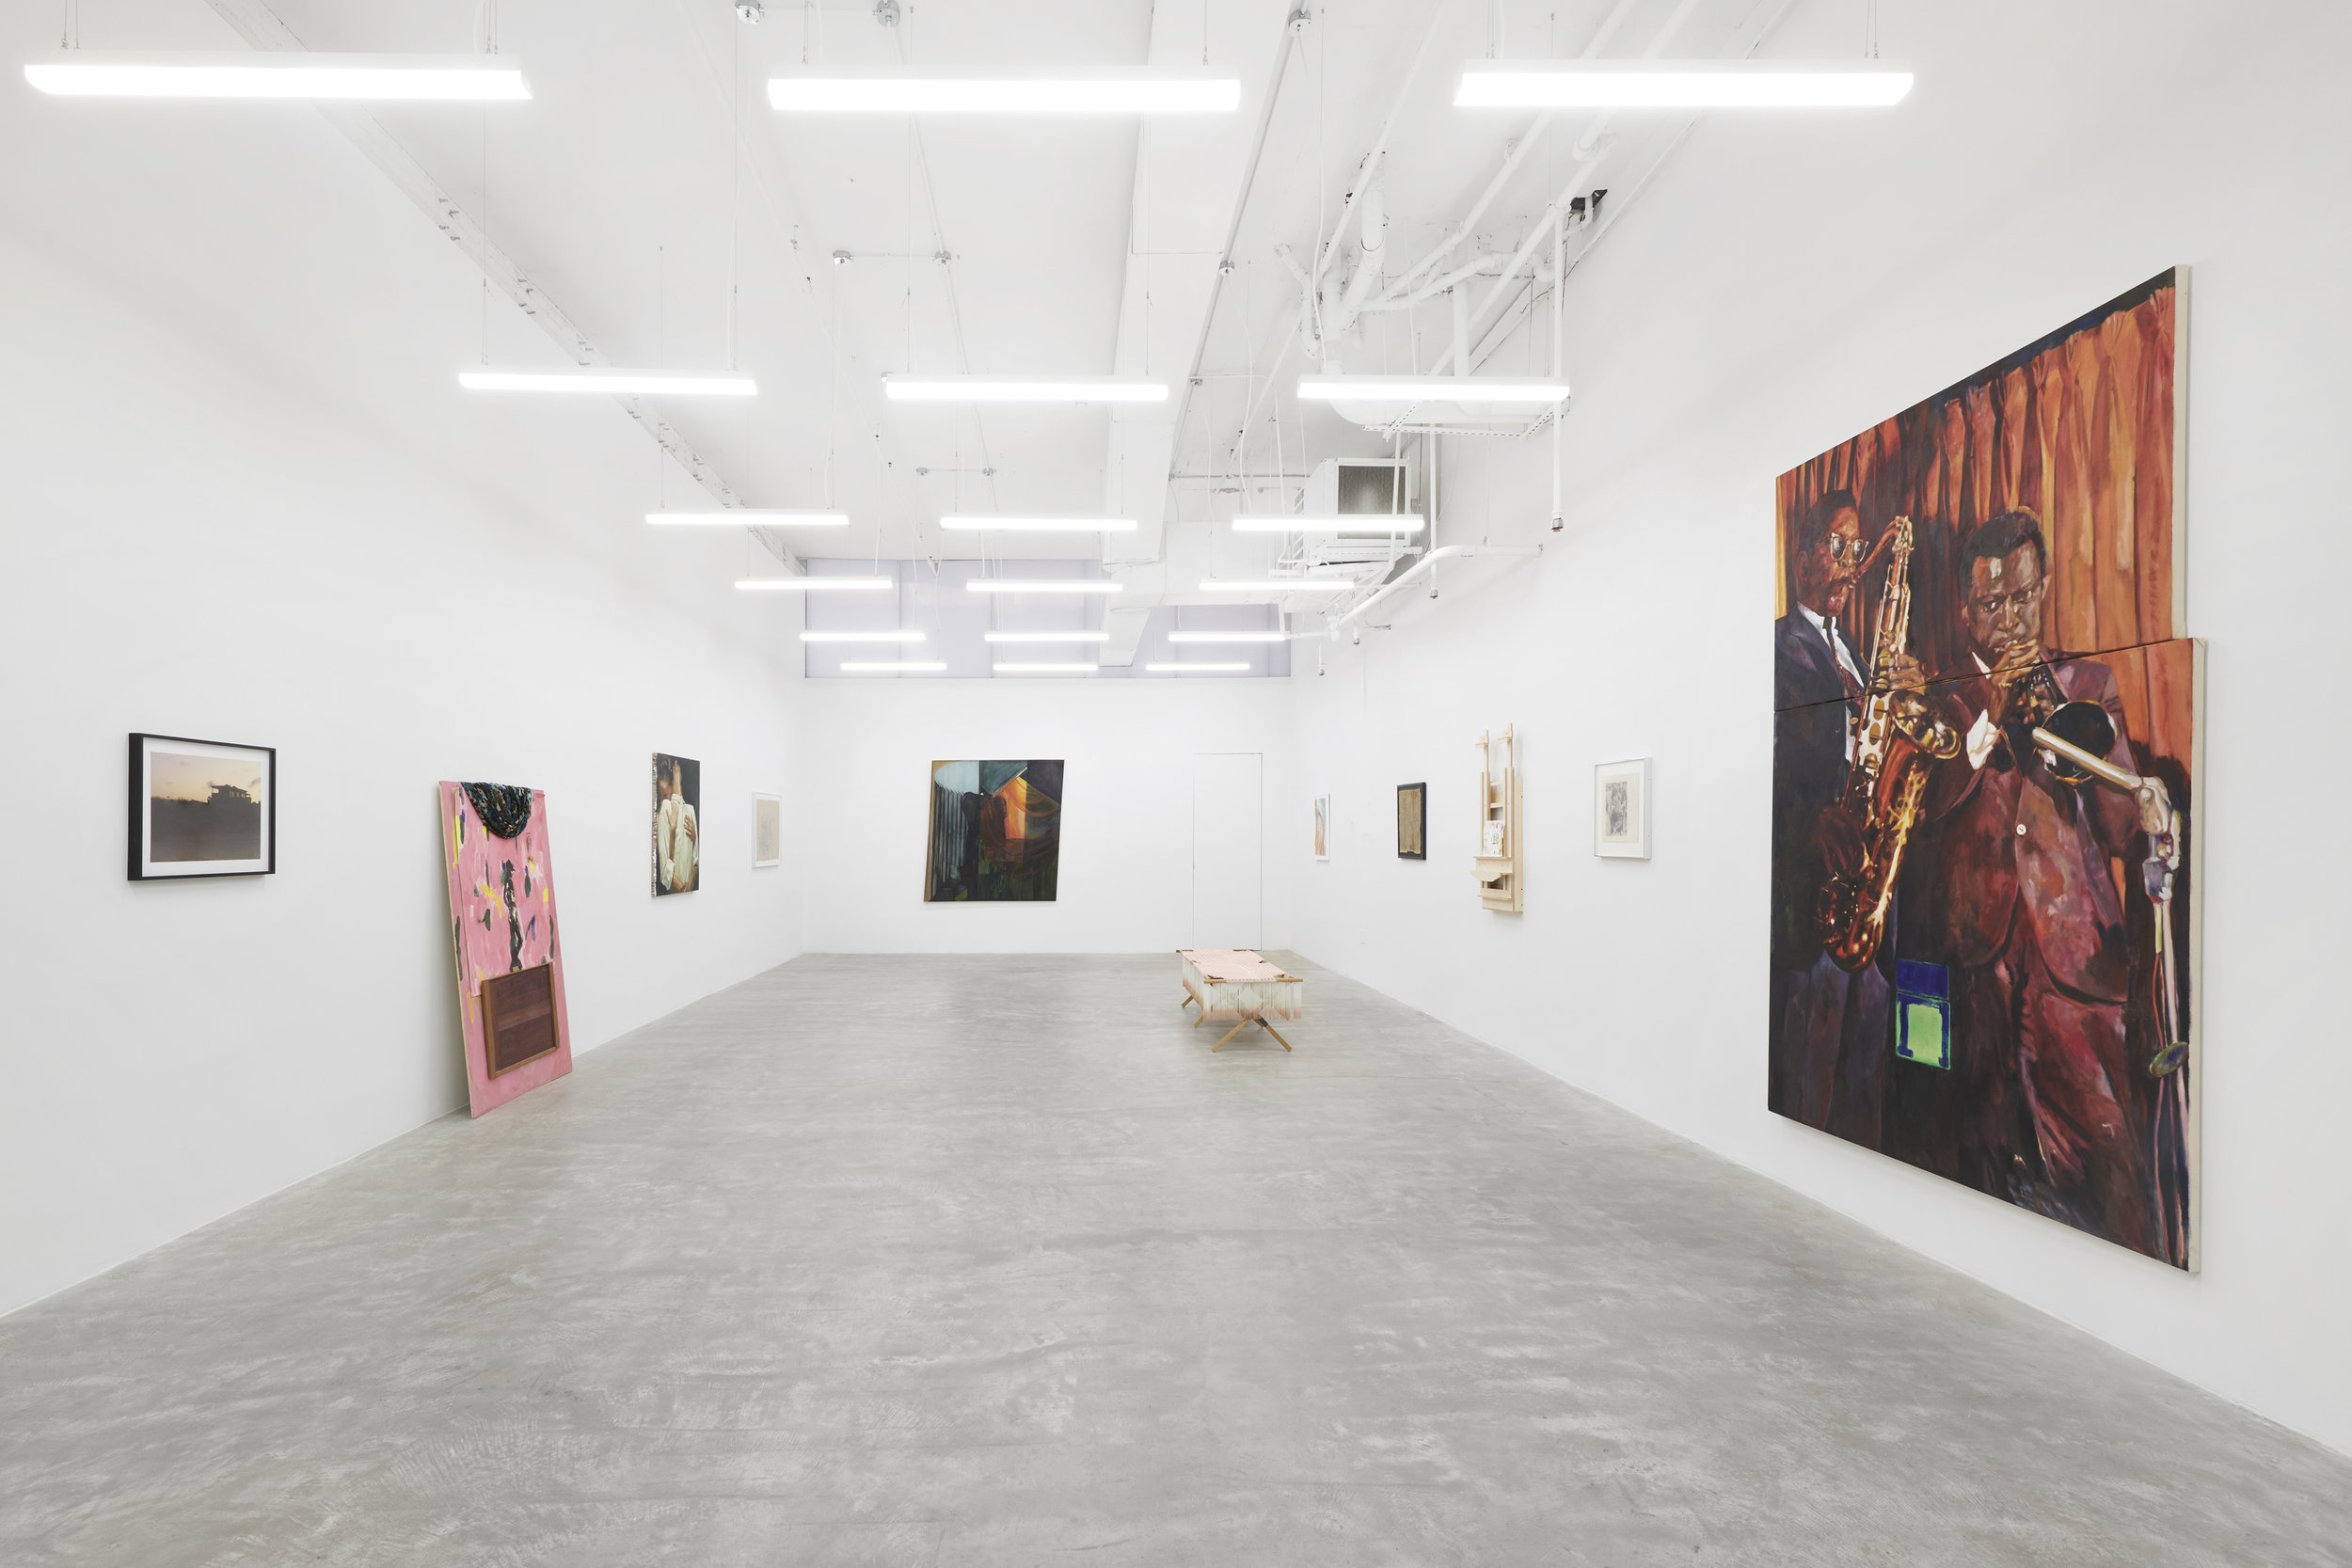 A Mimetic Theory of Desire, group exhibition at David Lewis Gallery, NYC